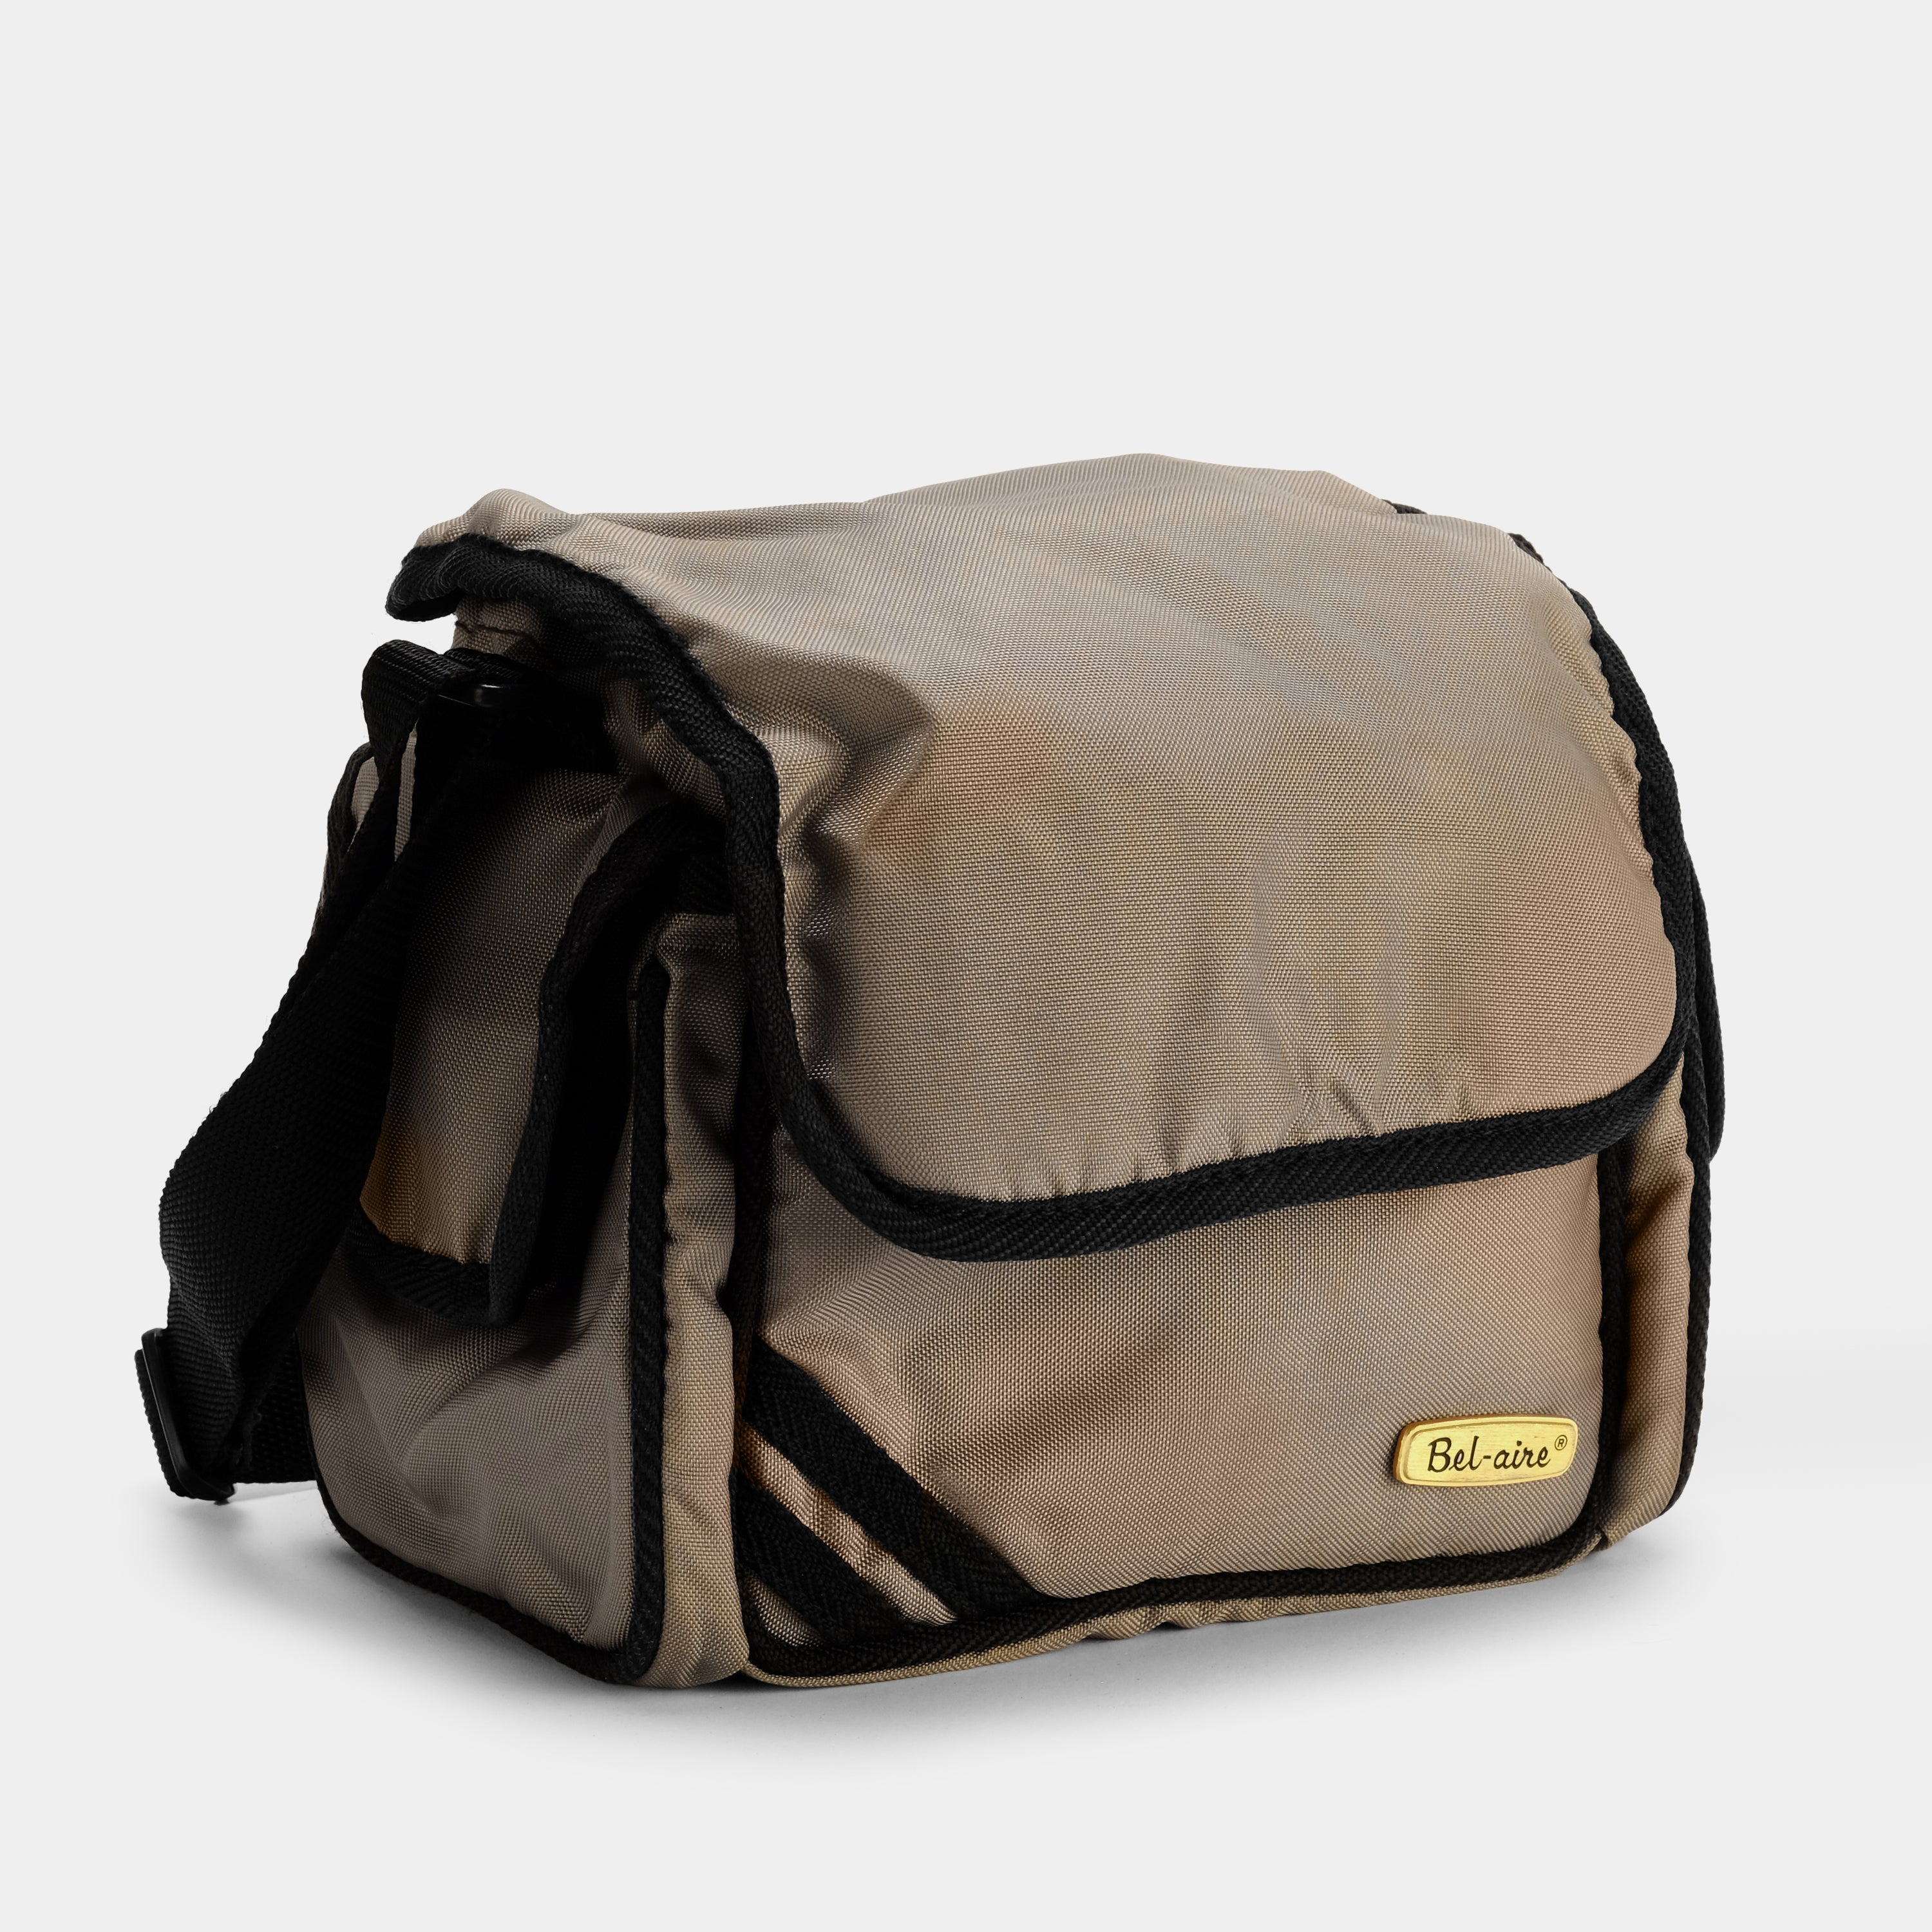 Bel-aire Taupe Camera Bag